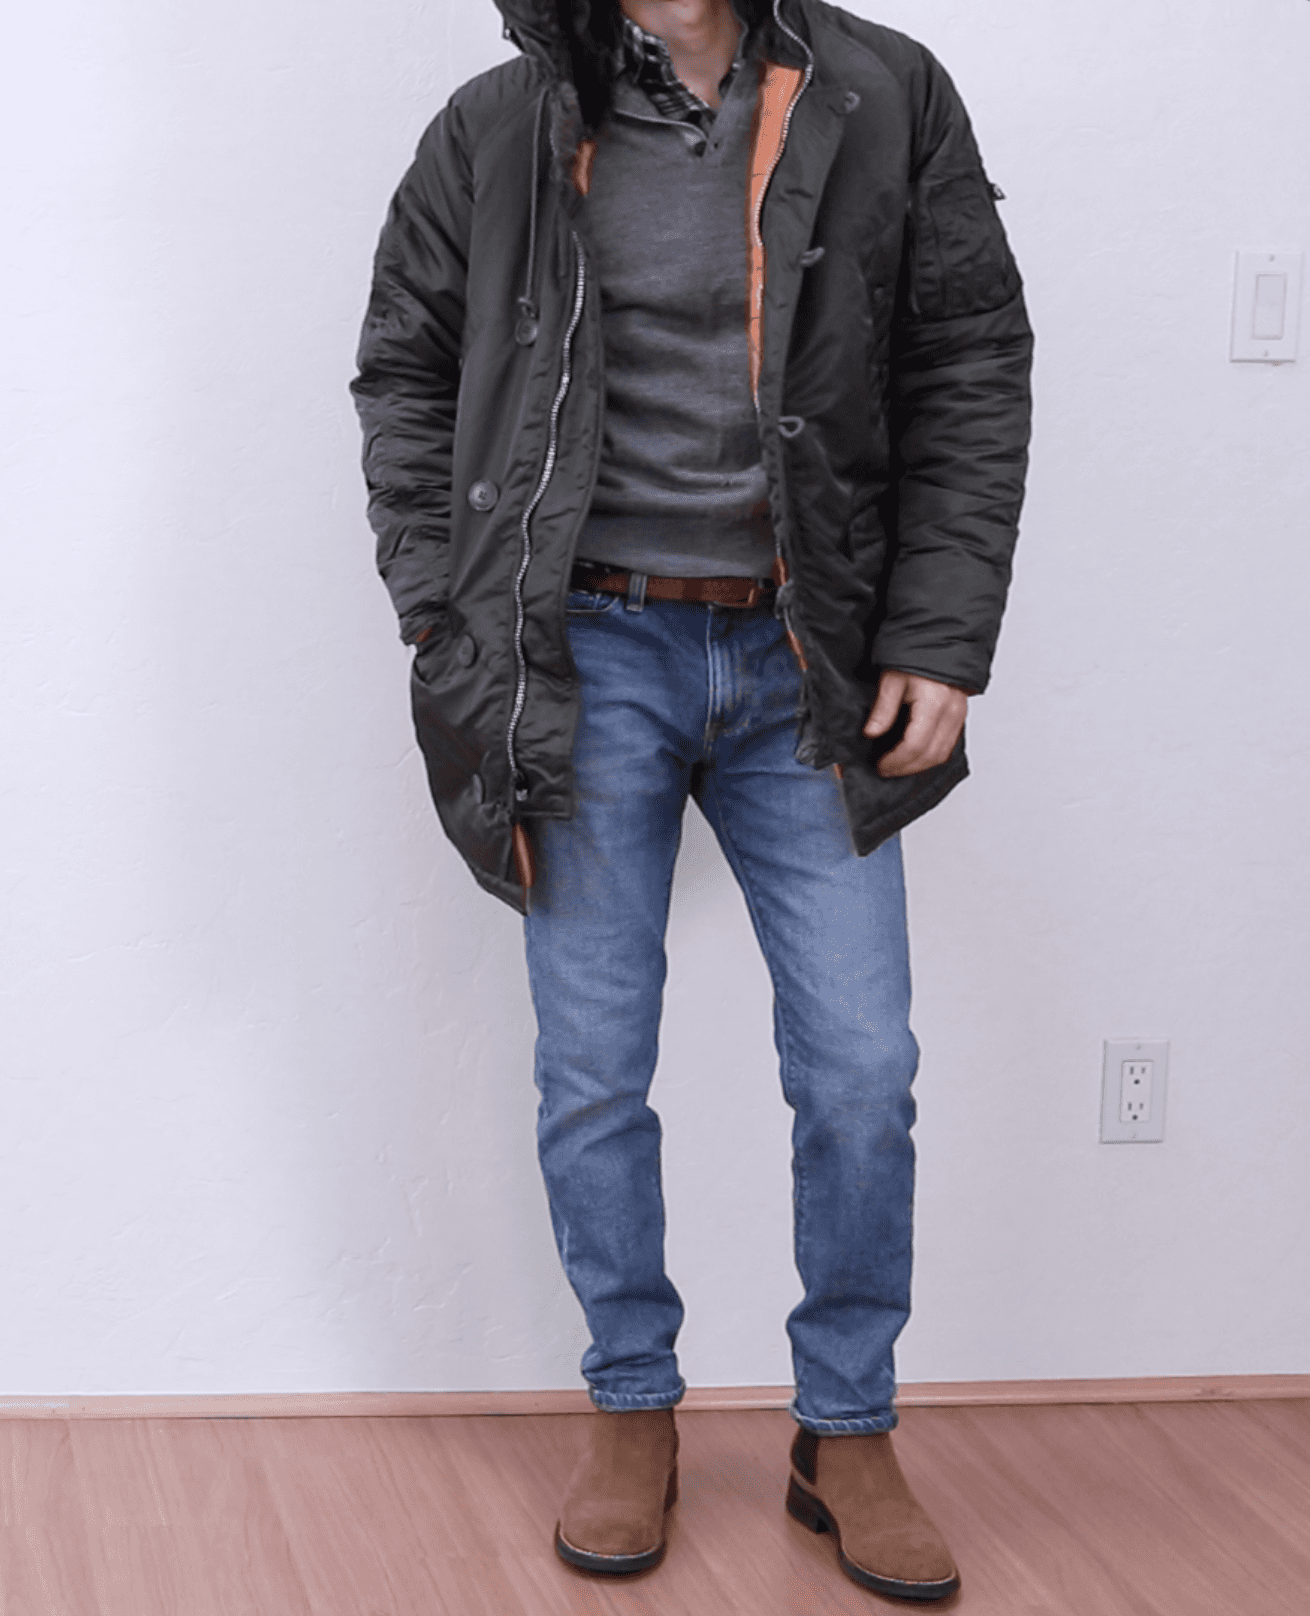 S.B.  Winter outfits men, Winter fashion casual, Mens outfits